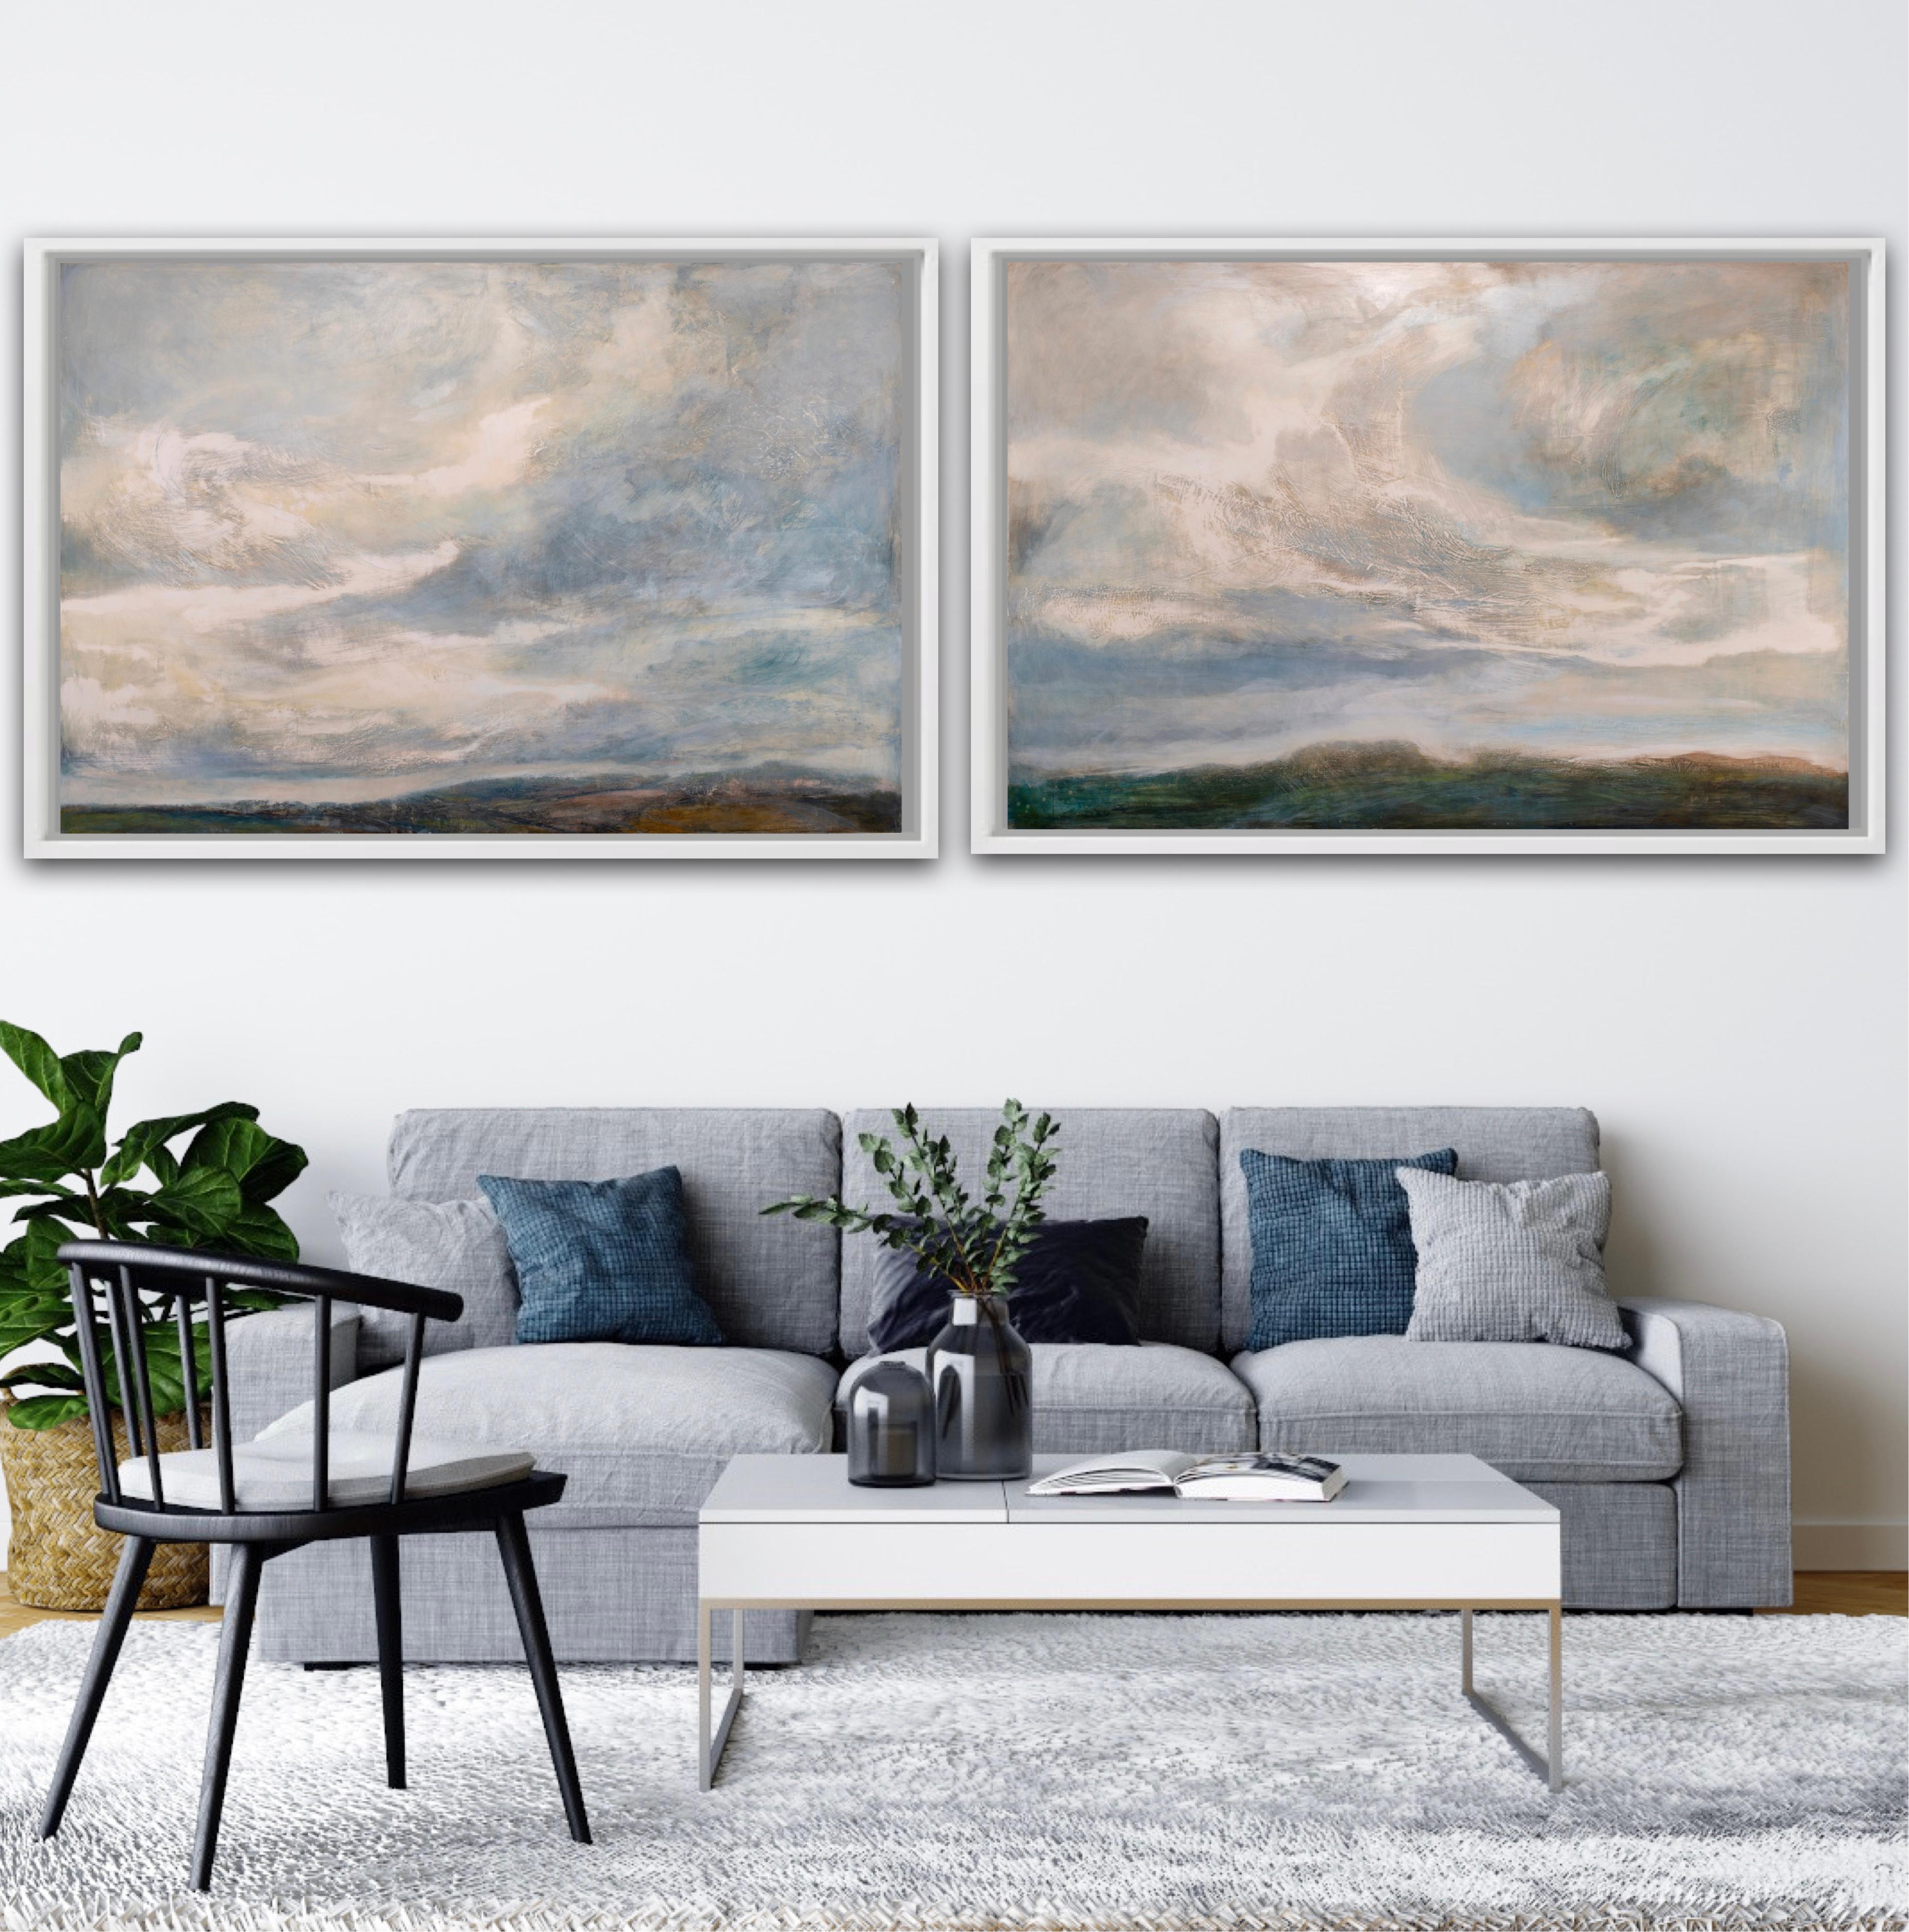 Grey Skies Change and Chromatic Grey Skies diptych  - Abstract Expressionist Painting by Alex McIntyre 